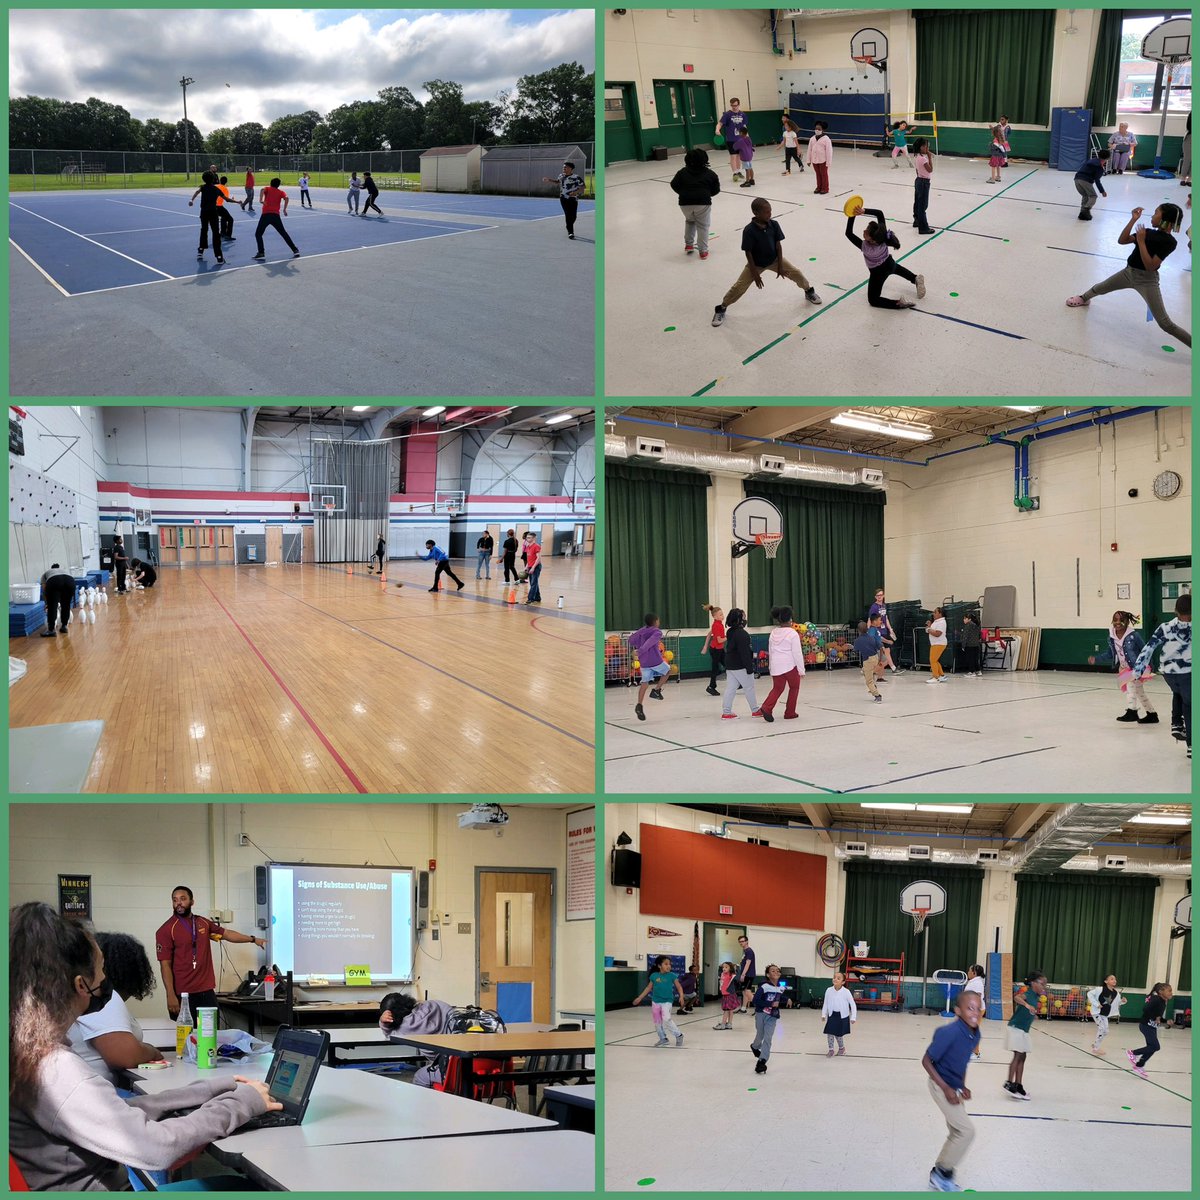 It might be the end of the year, but there is still a lot of learning taking place in NNPS gyms and health classrooms! #NNPSProud #HPE #health #PhysEd